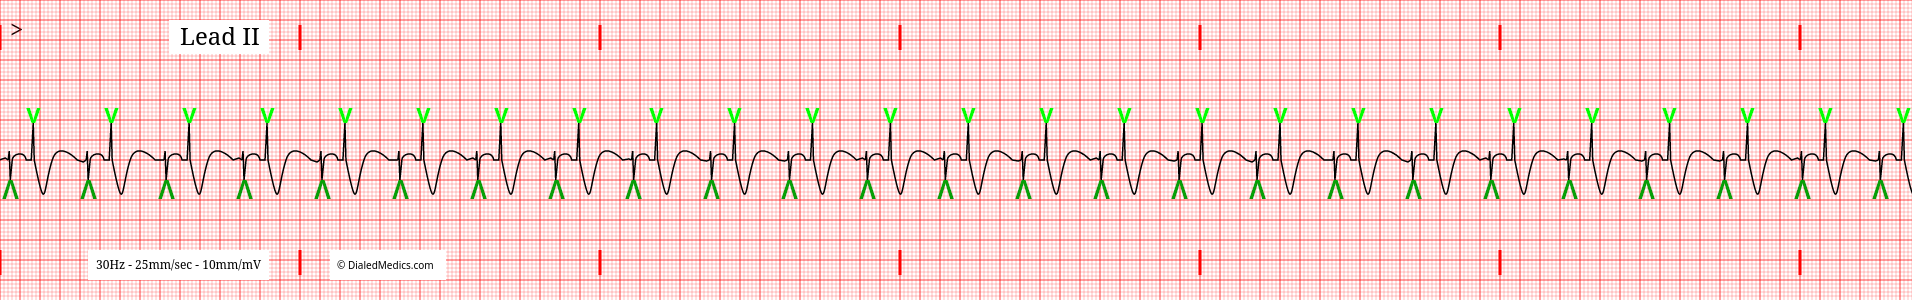 Atrio-Ventricular paced rhythm with pacer spikes marked in green.